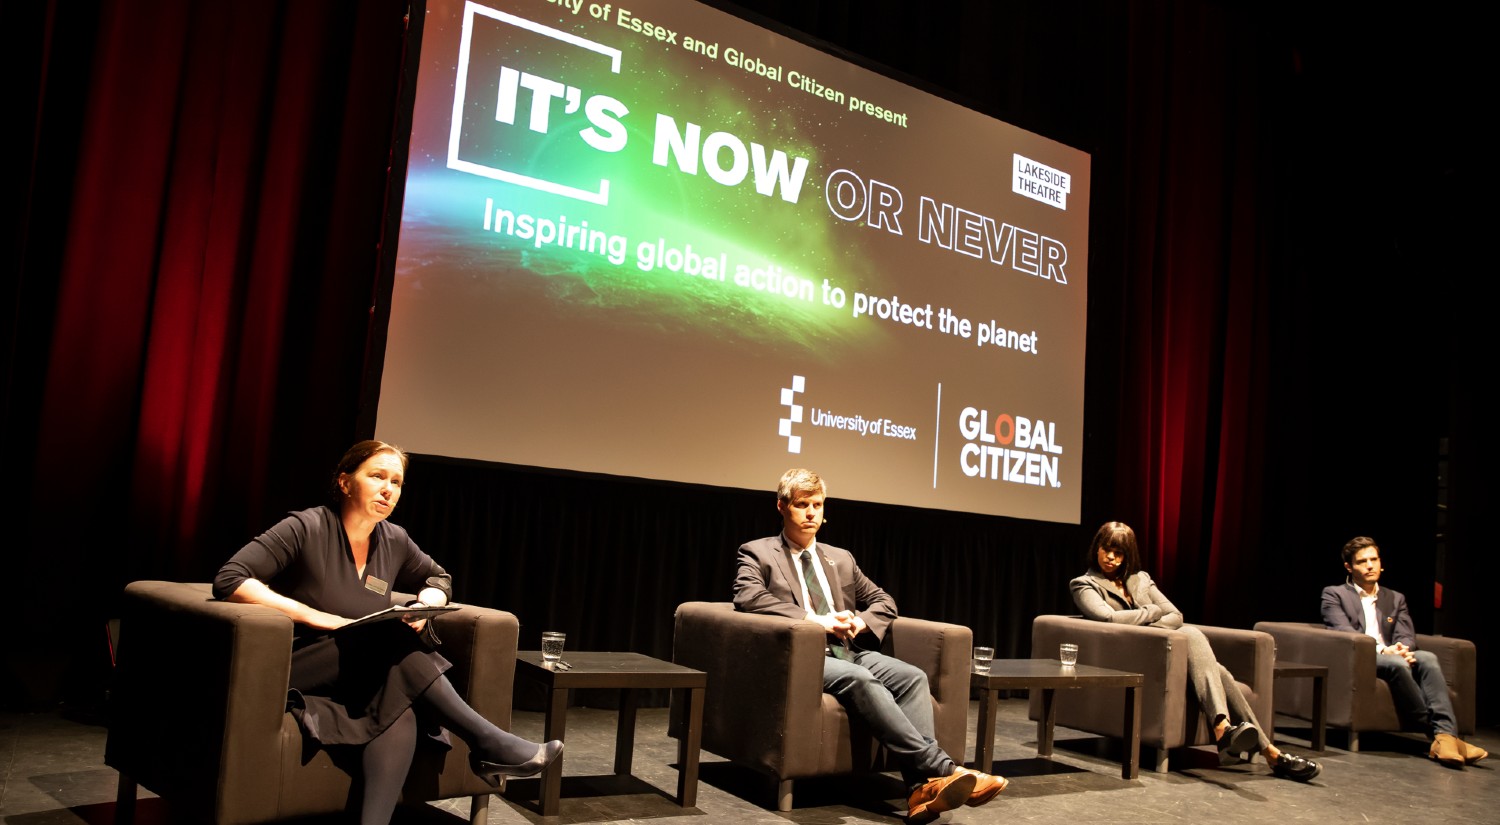 The panel discuss the climate crisis 